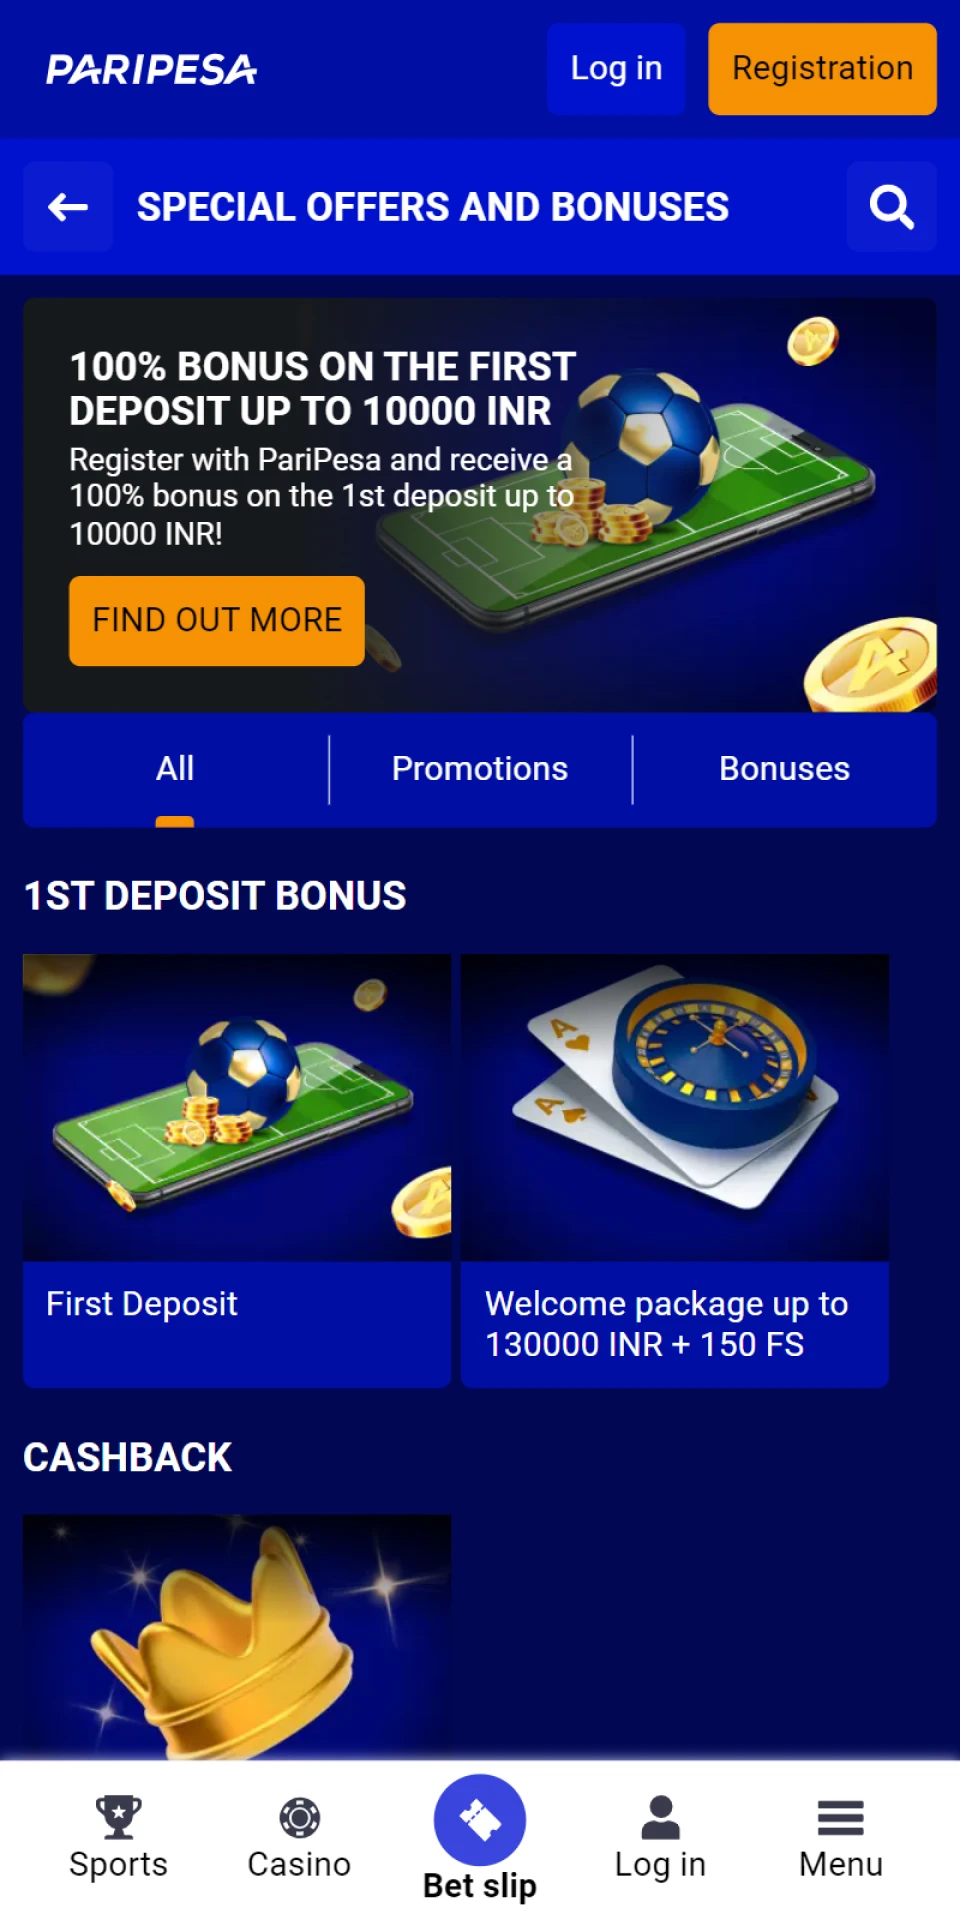 The Paripesa mobile app offers many lucrative bonuses for sports and casinos.